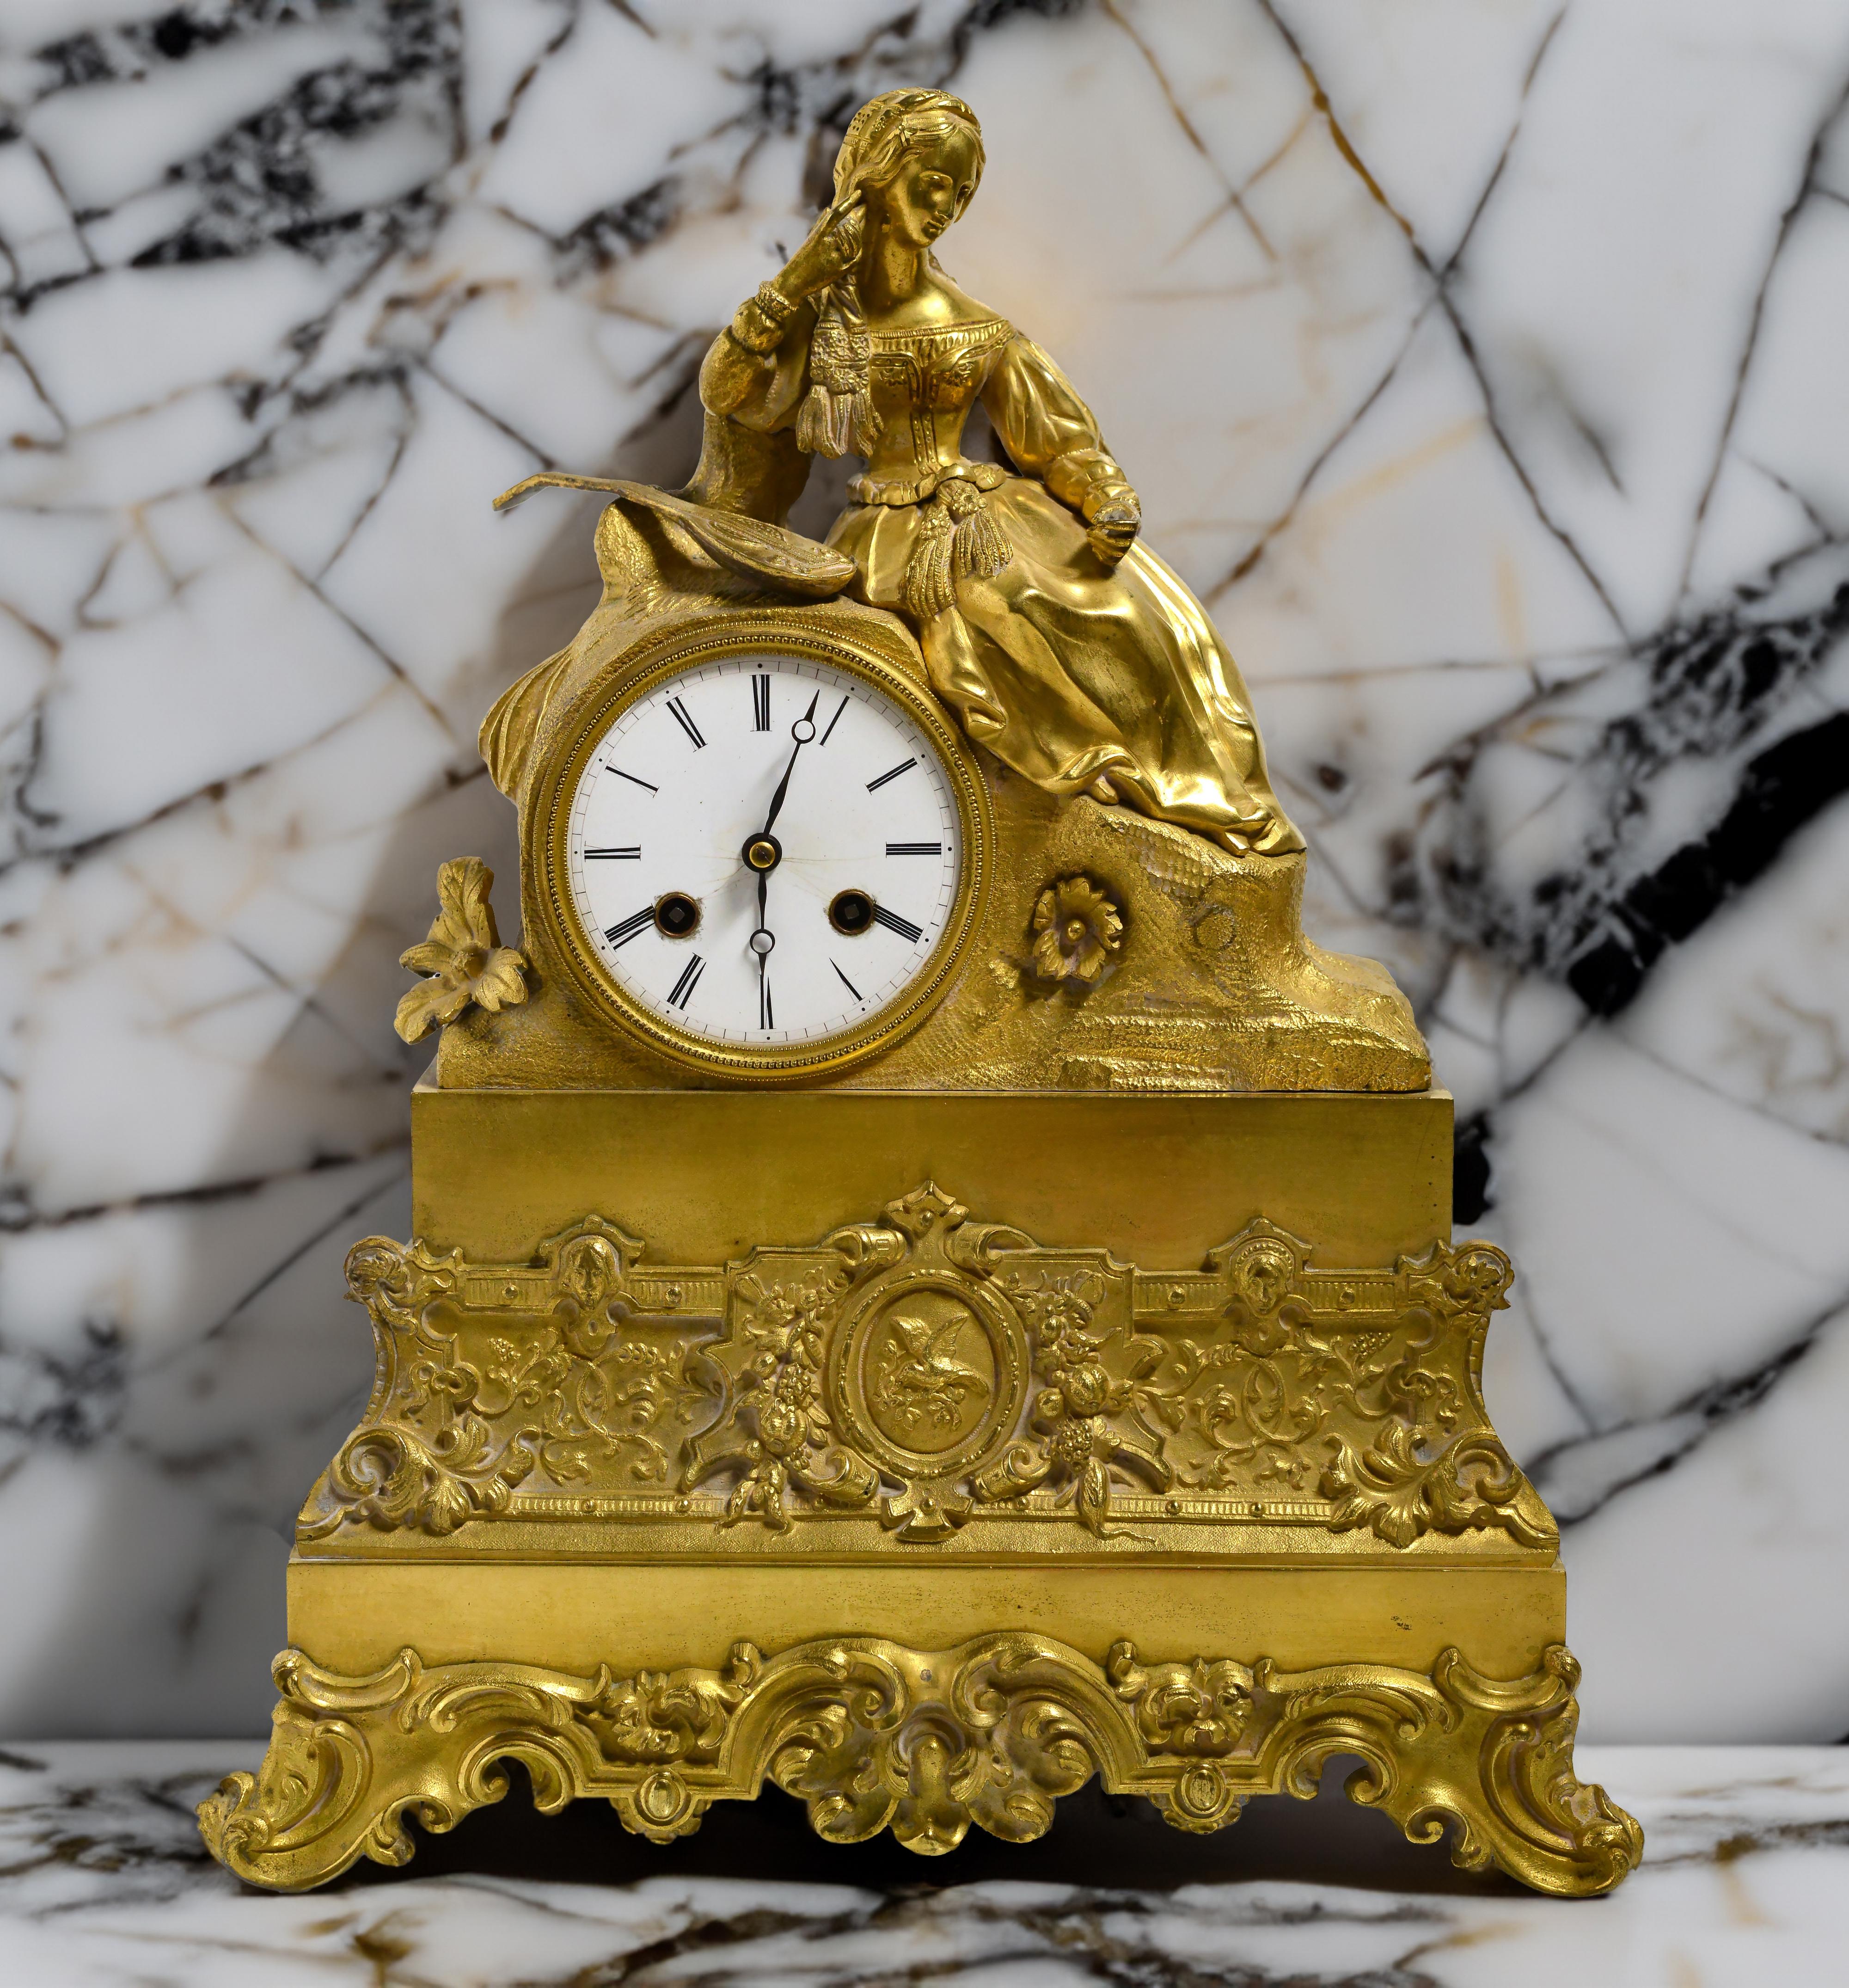 Fine work of gold-plated bronze as mantel (desk, shelf) clock. Italian A renaissance girl thoughtfully holds a strand of hair in a relaxed reclining pose. Antique French gilt bronze figural clock,19th century.
Size app.: 36 cm (roughly 14.2 in)